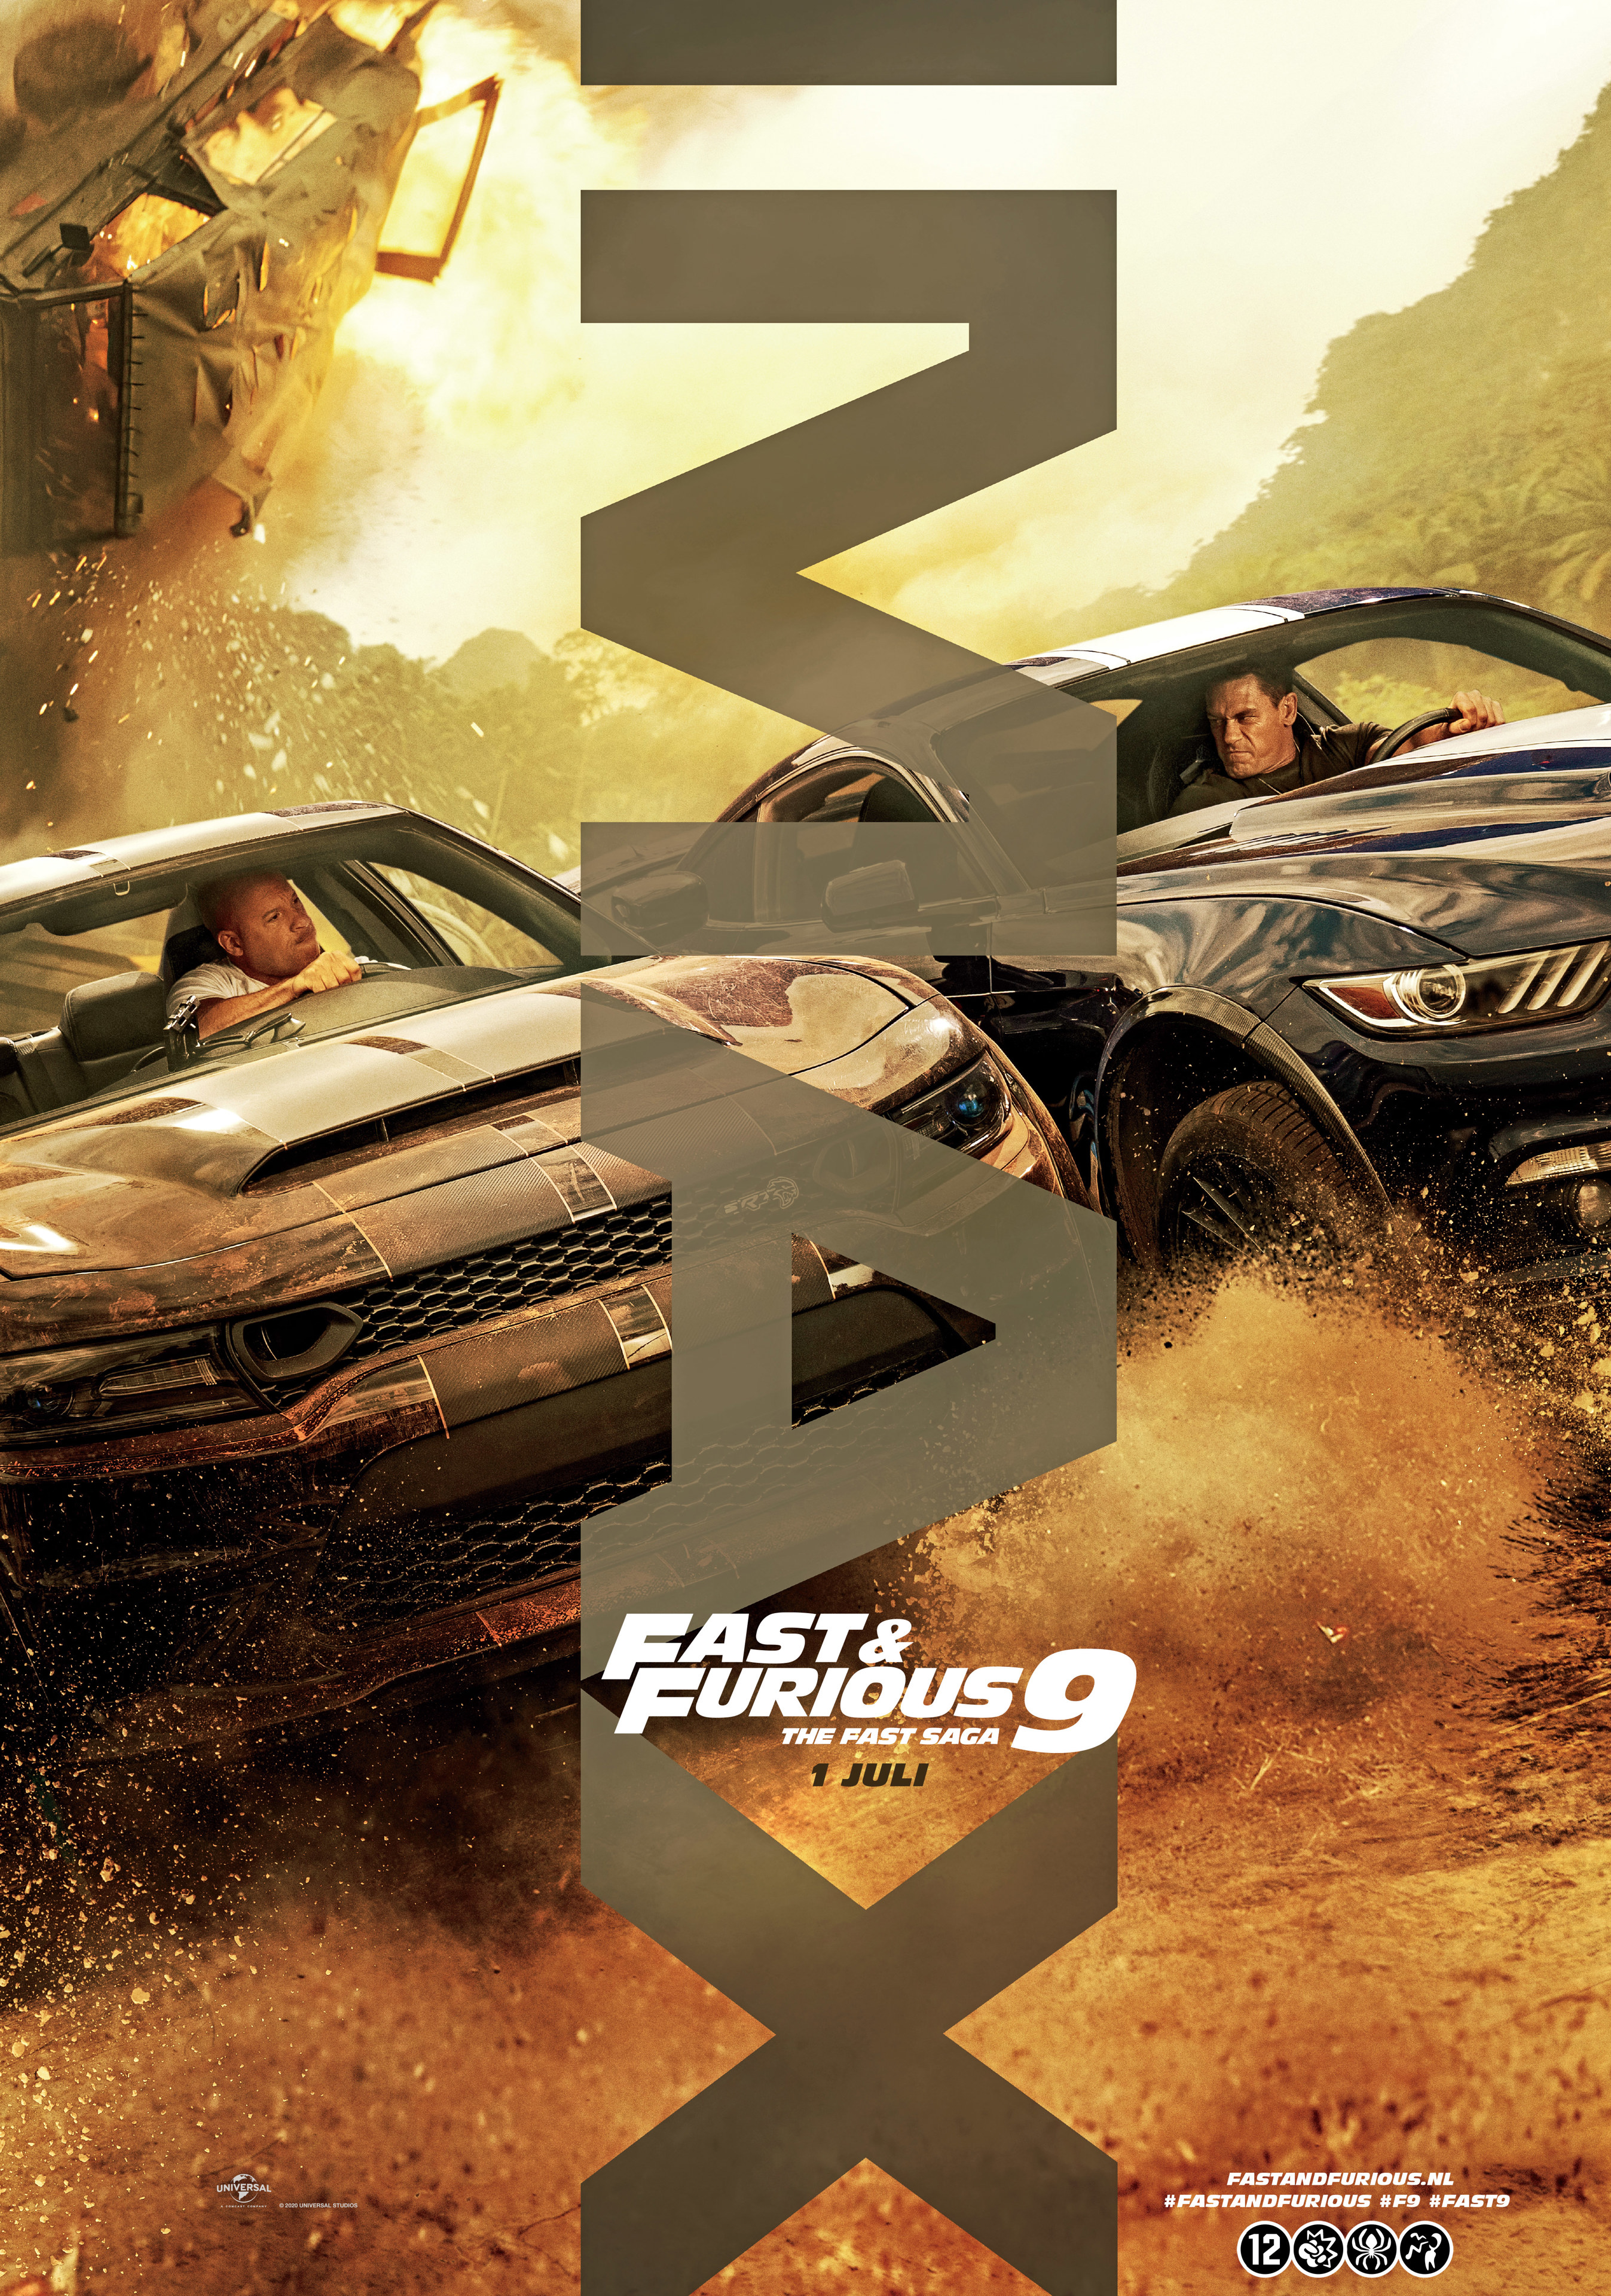 9 fast full furious movie and Fast And